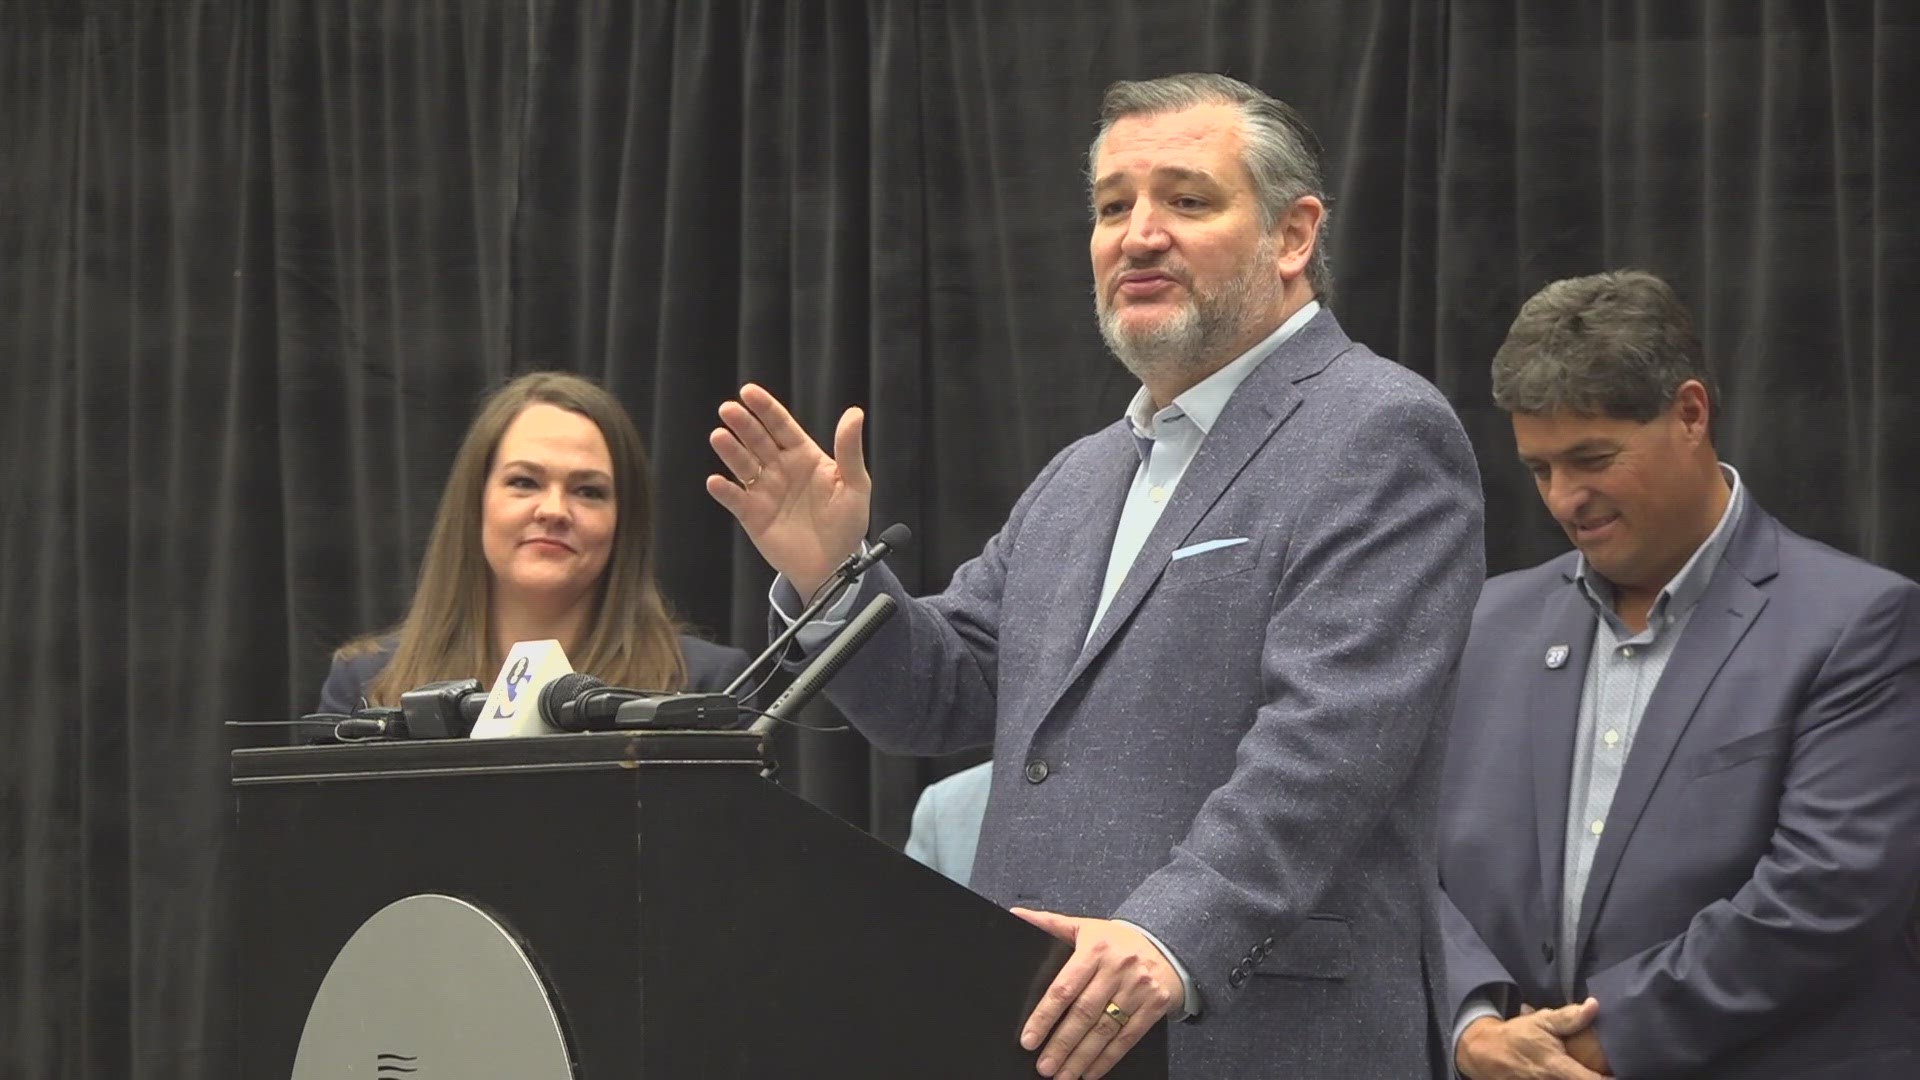 I-27 will run through Midland-Odessa and Big Spring. Senator Cruz spoke on the benefits that the ports-to-plains corridor will bring to the region, state and U.S.